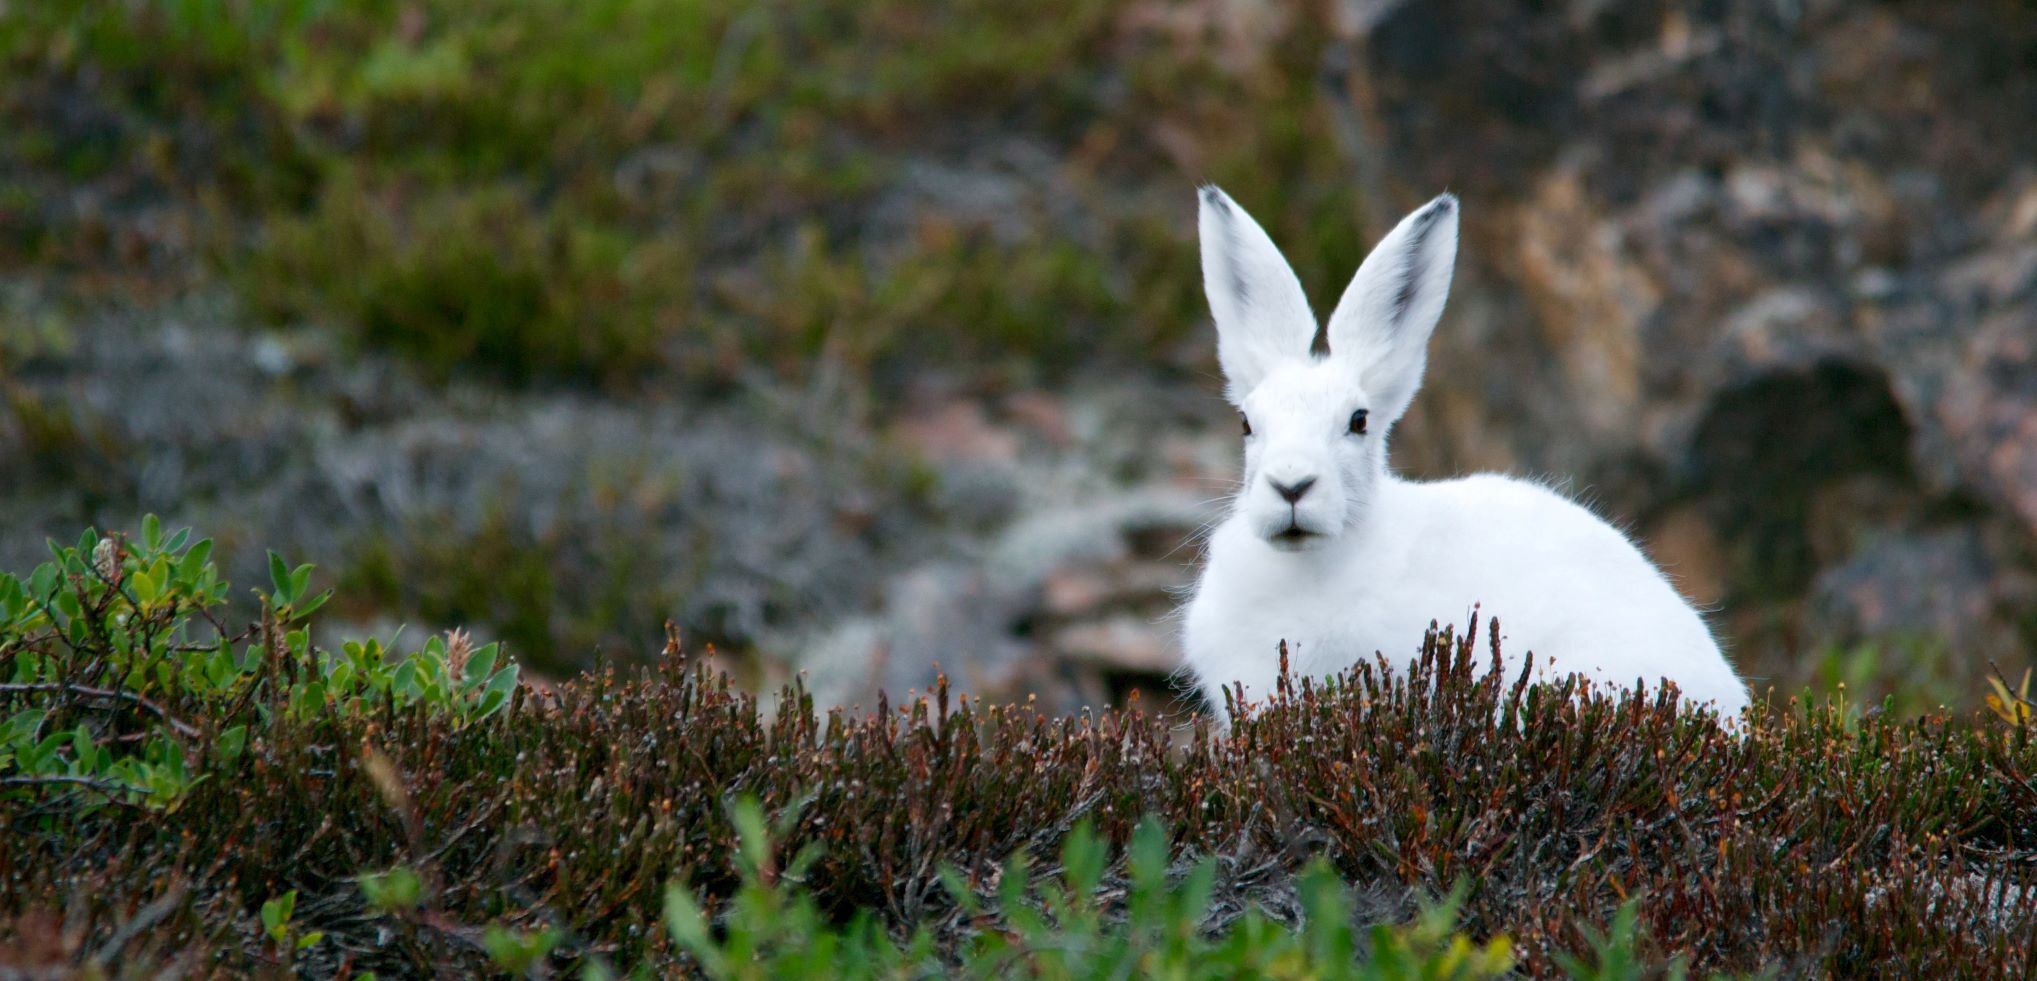 A mountain hare with white winter coat sitting amongst green heather